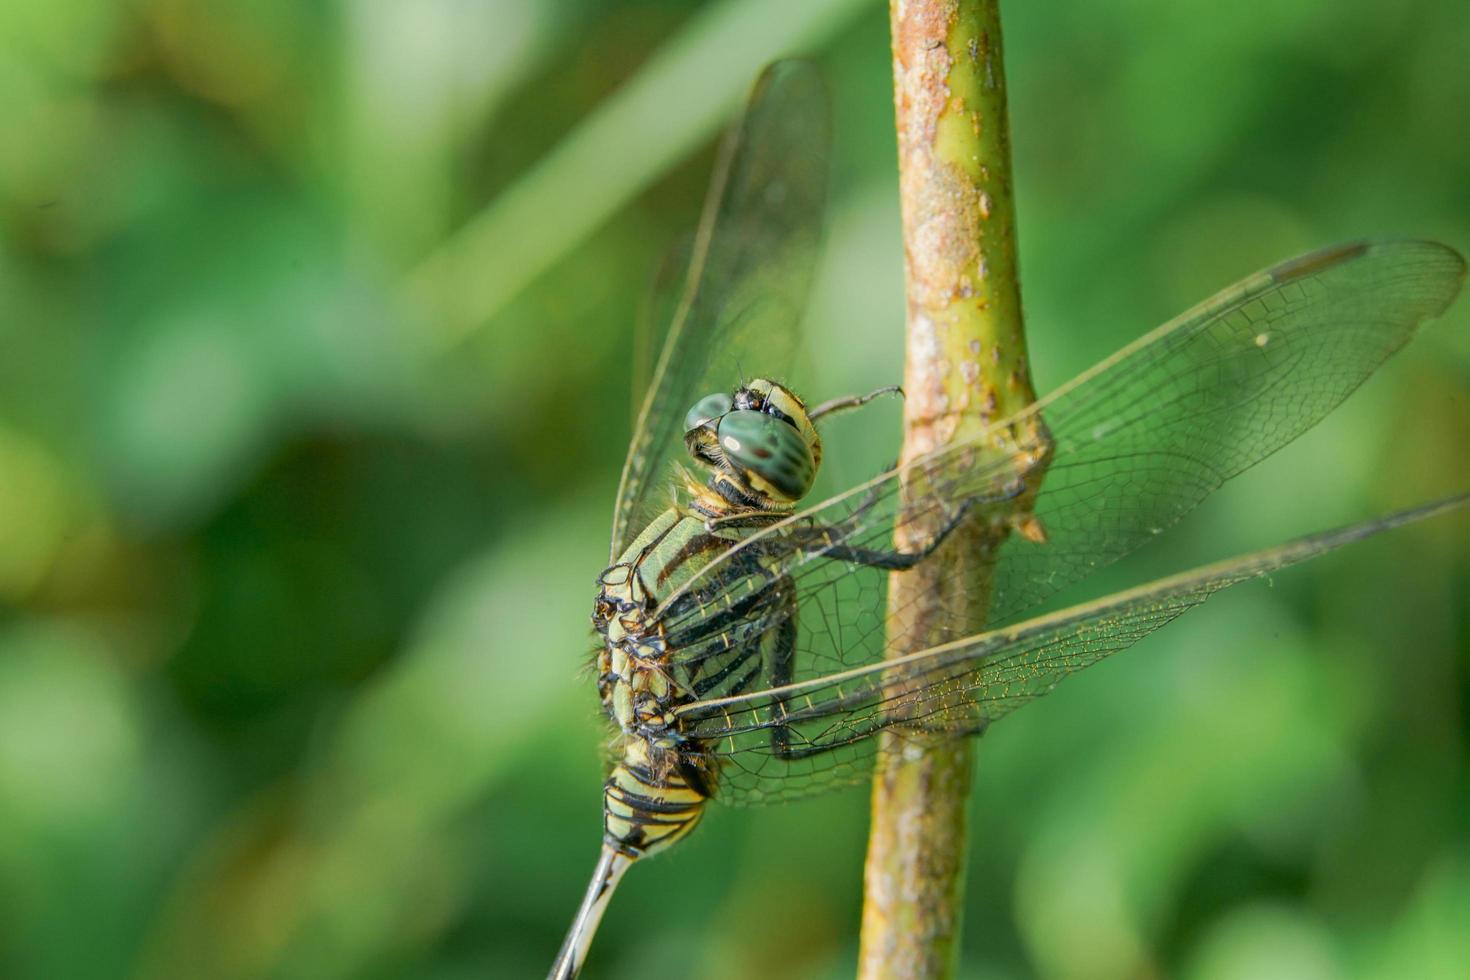 picture of a dragonfly perched on a tree trunk with blurry background focus on his eyes, macrophotography photo